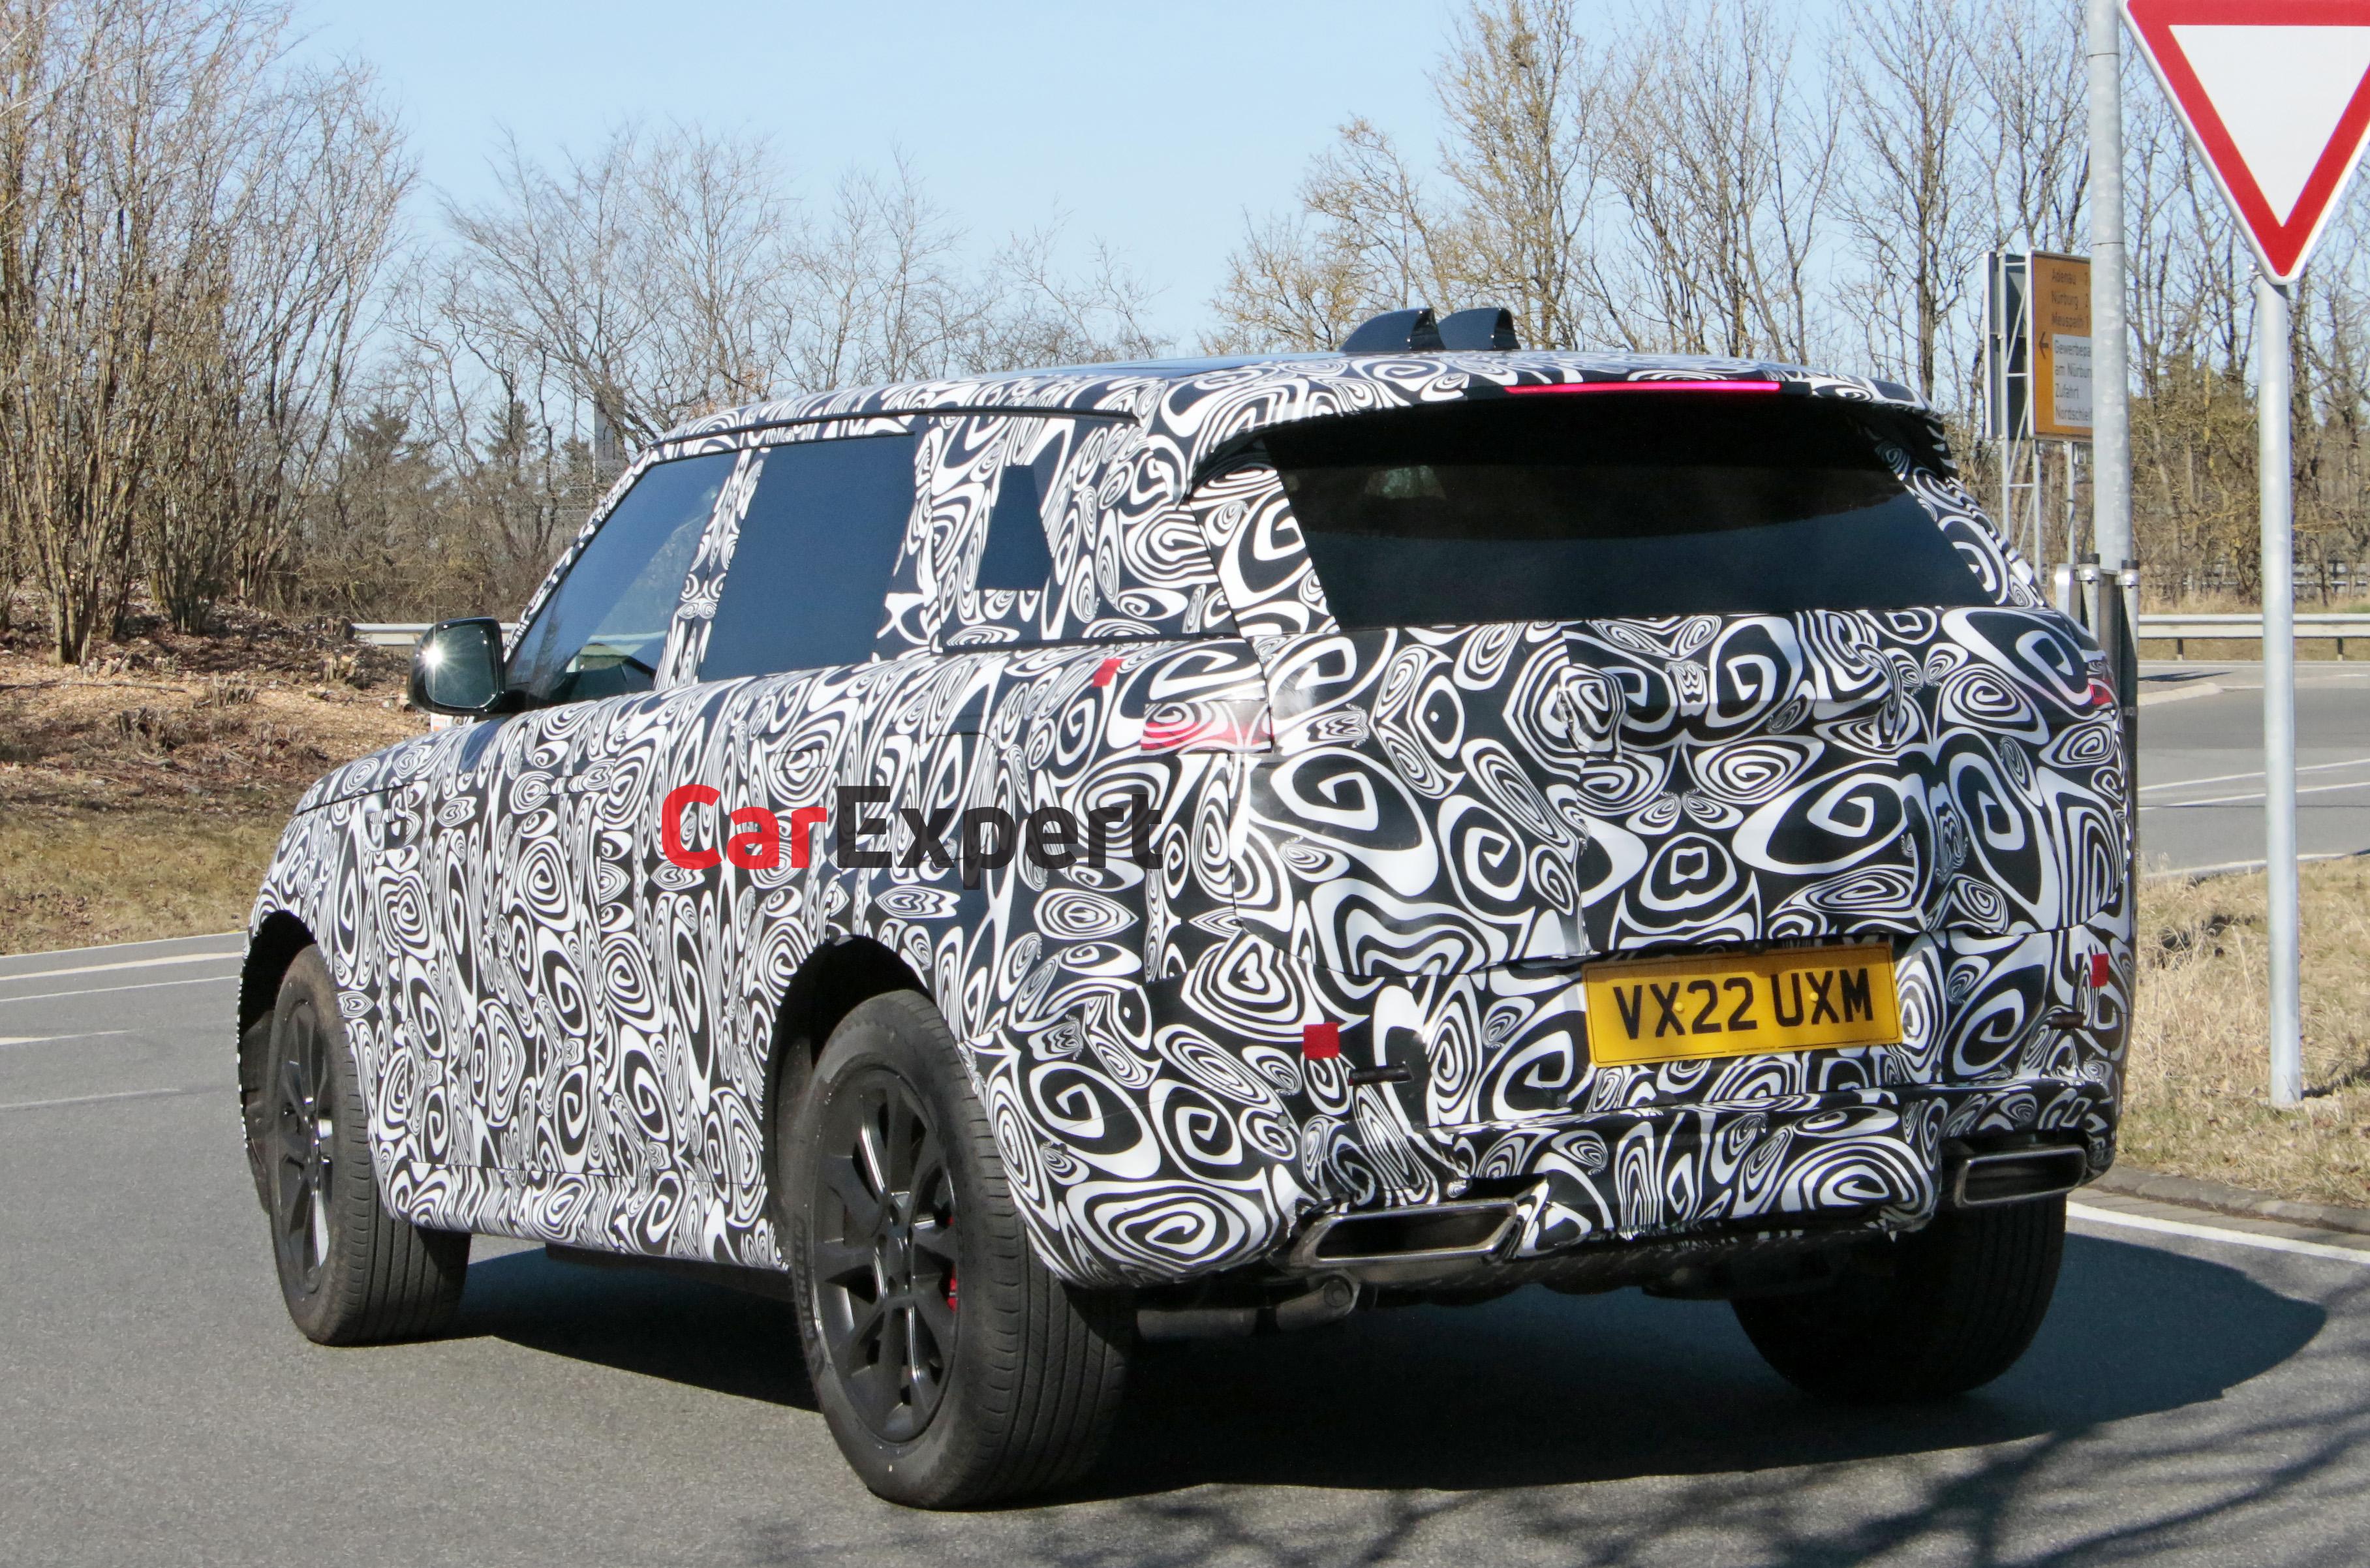 2023 Range Rover Sport spied with less camouflage